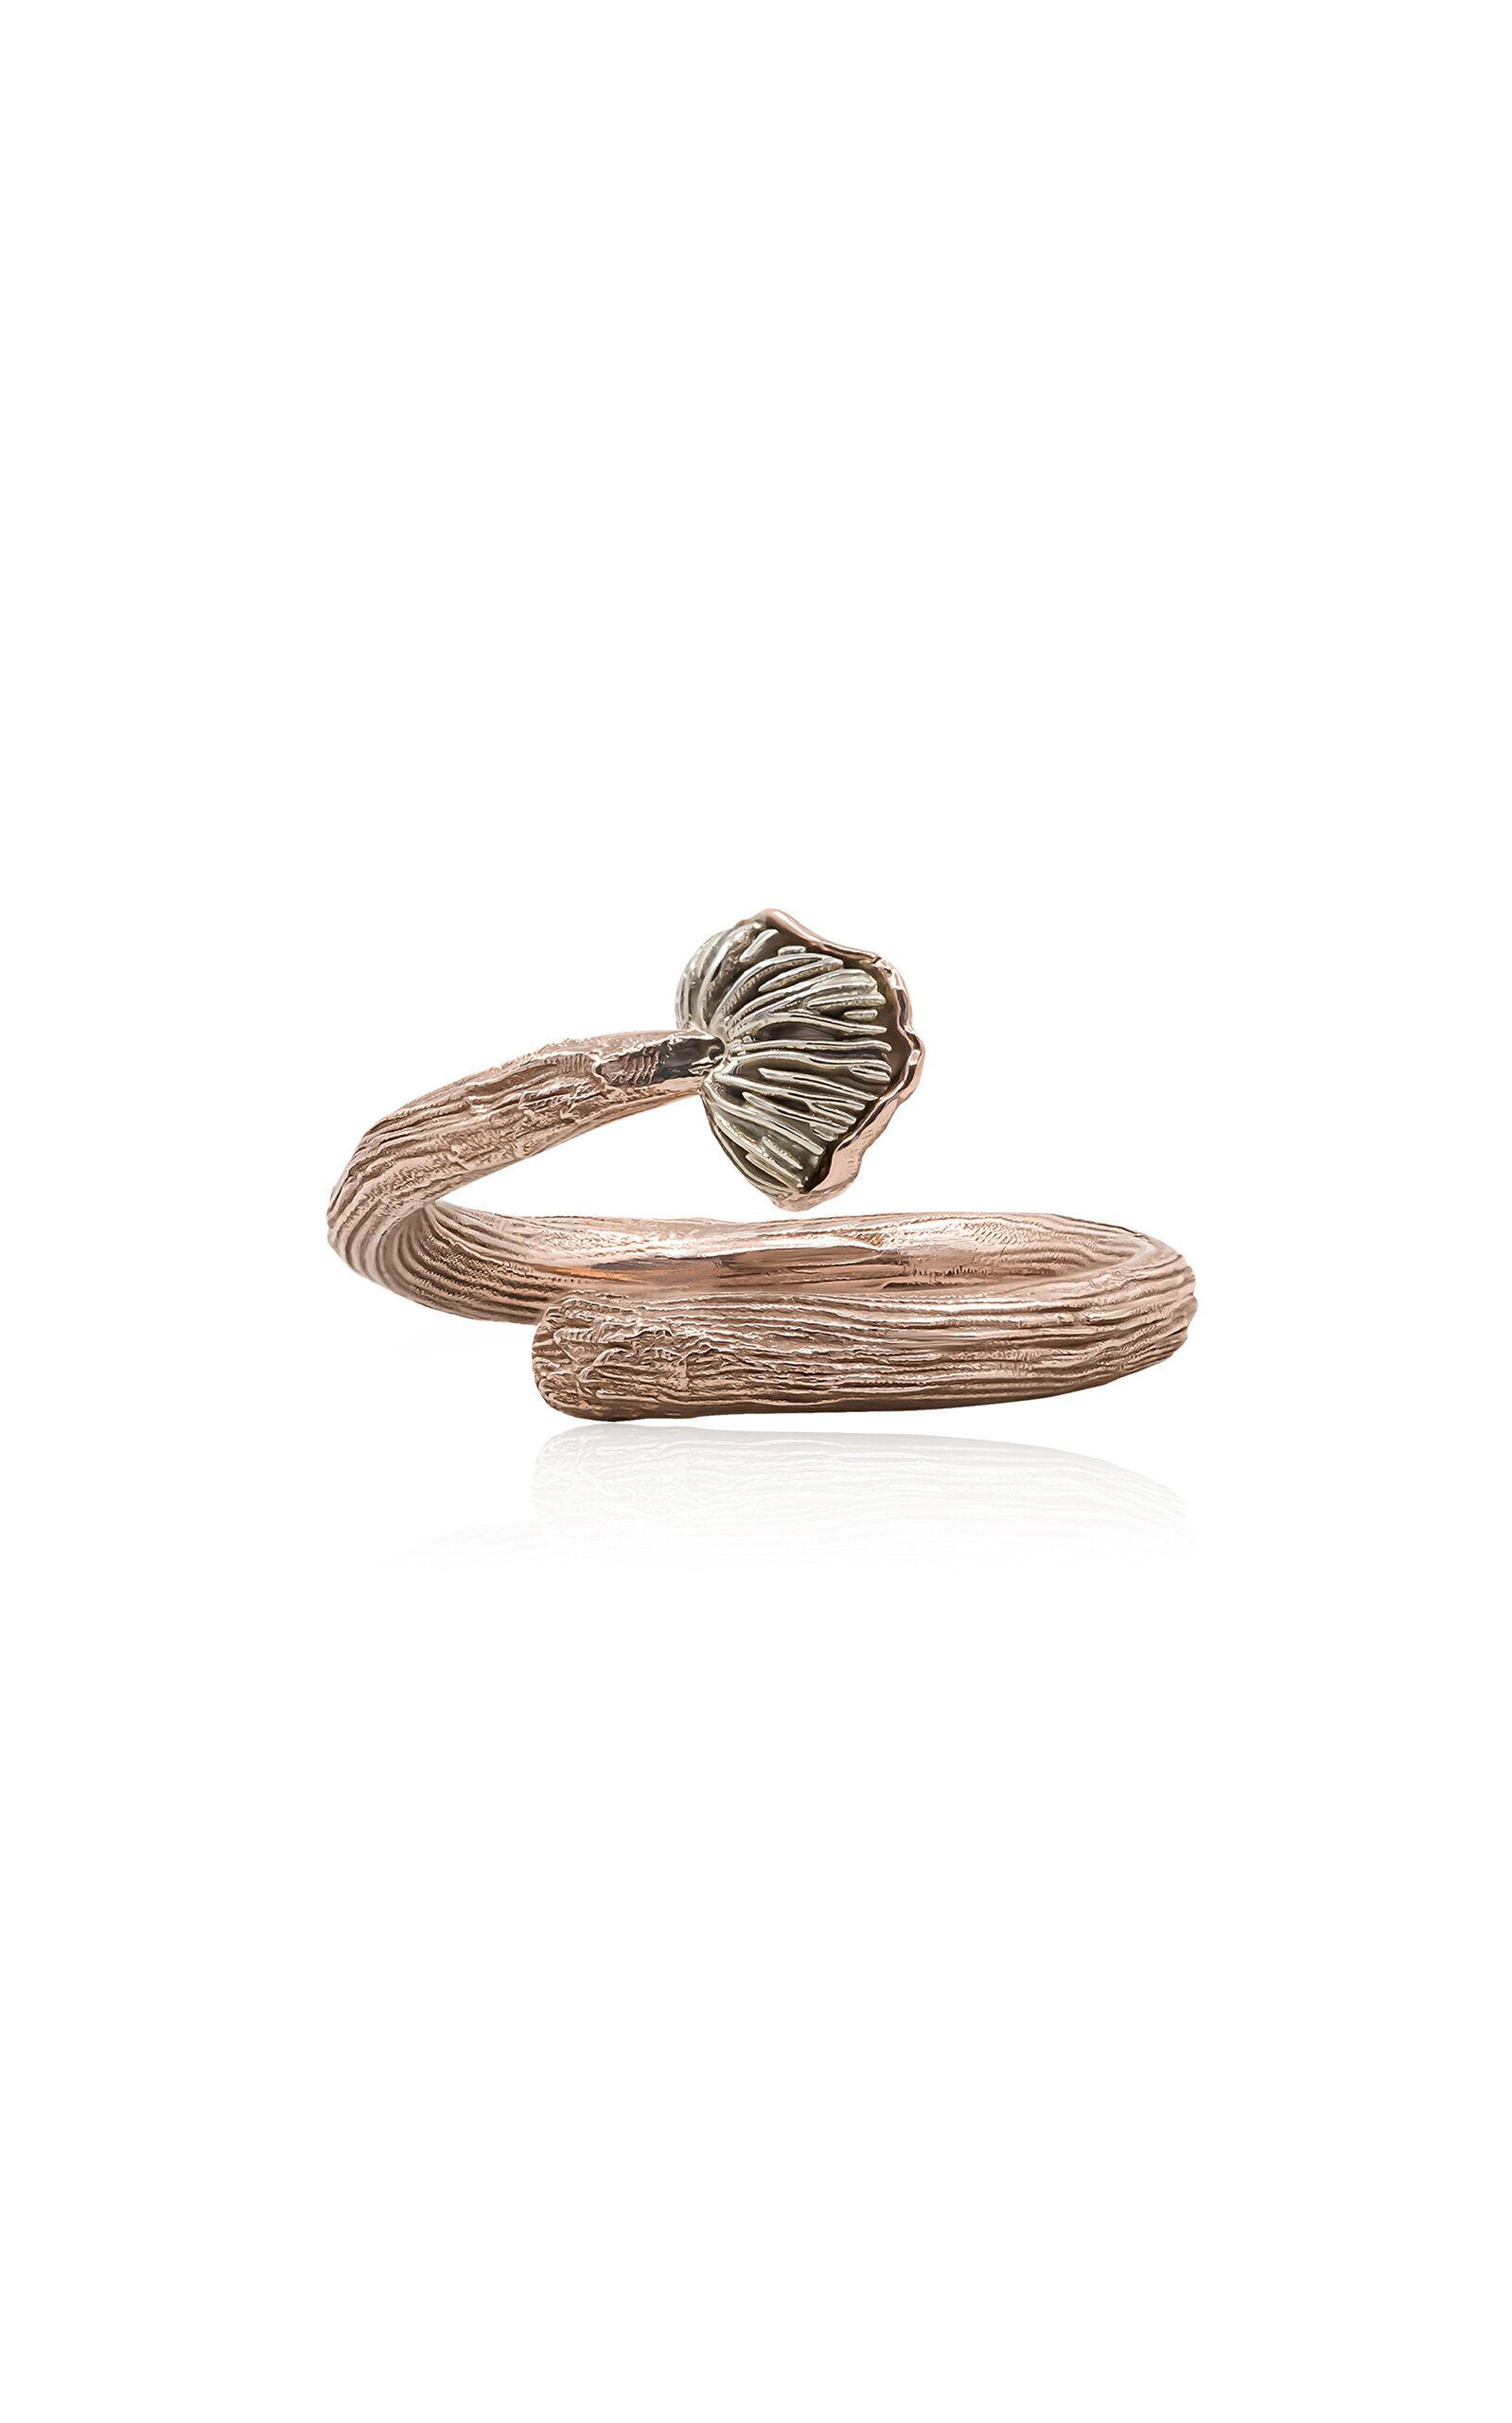 Fungi Laccaria 14K White and Rose Gold Ring